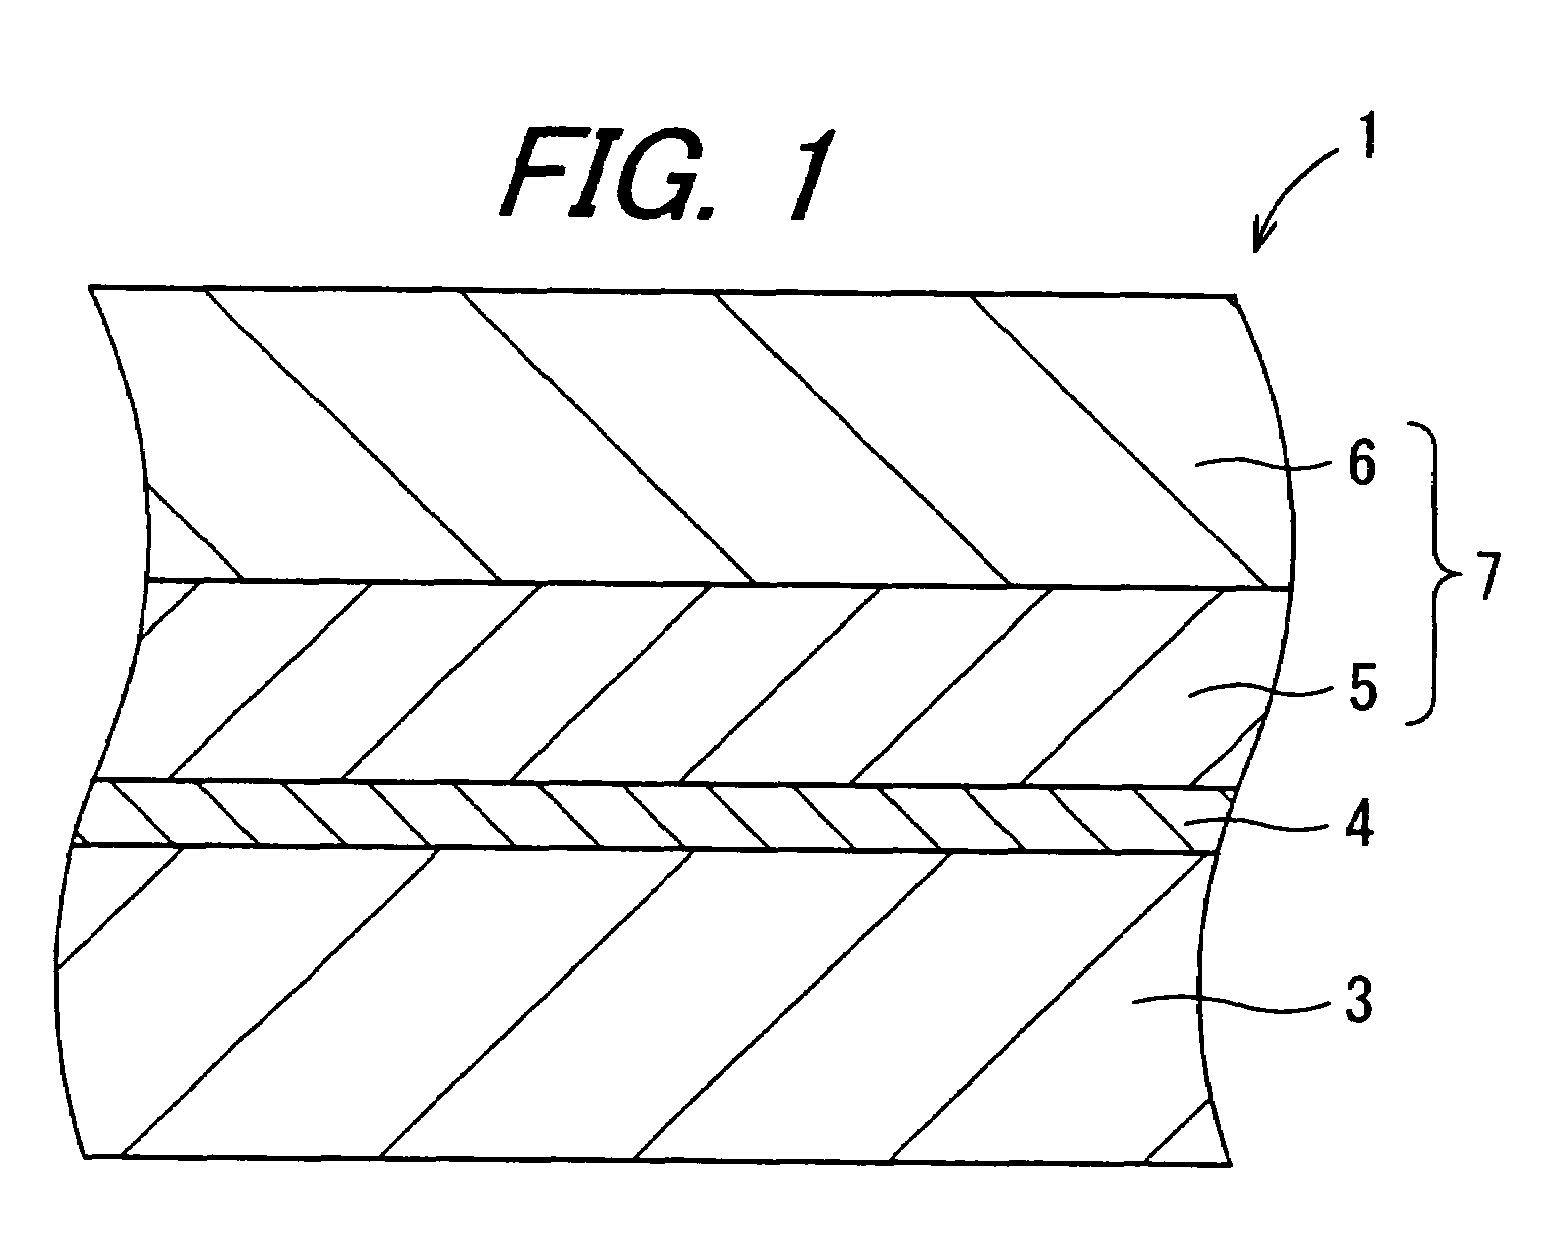 Electrophotographic photoreceptor and image forming apparatus